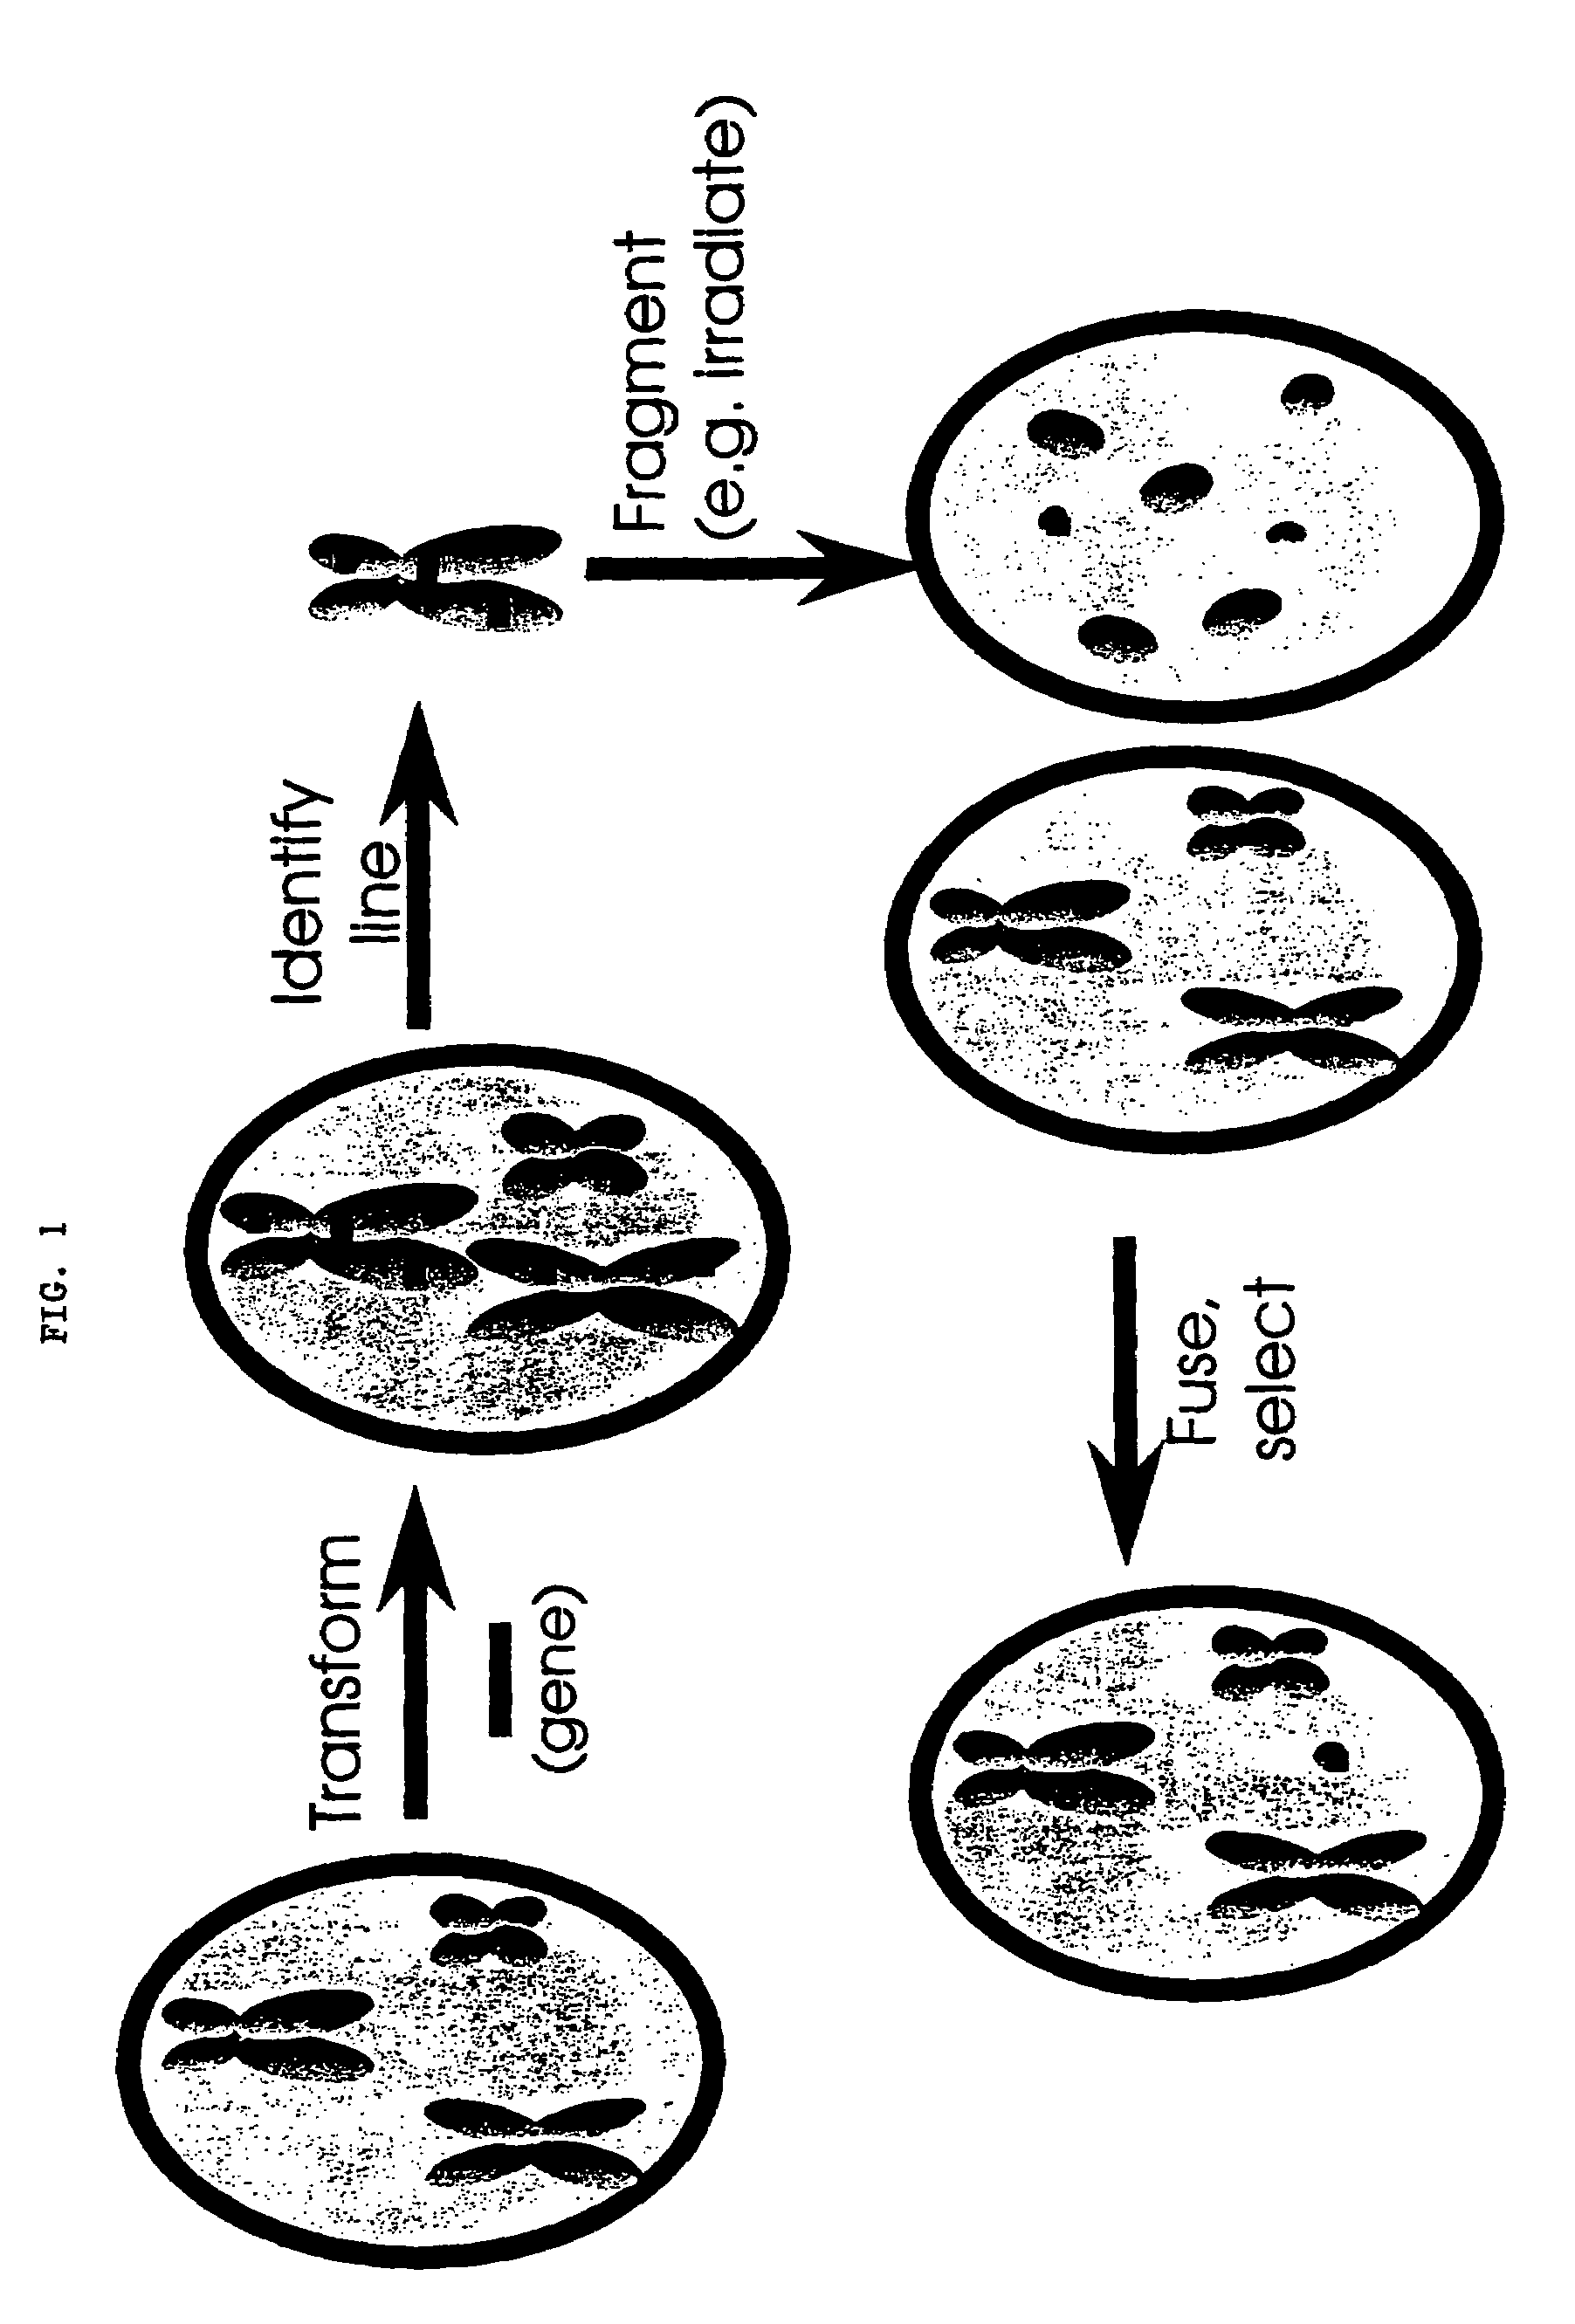 Method of making plant artificial chromosomes